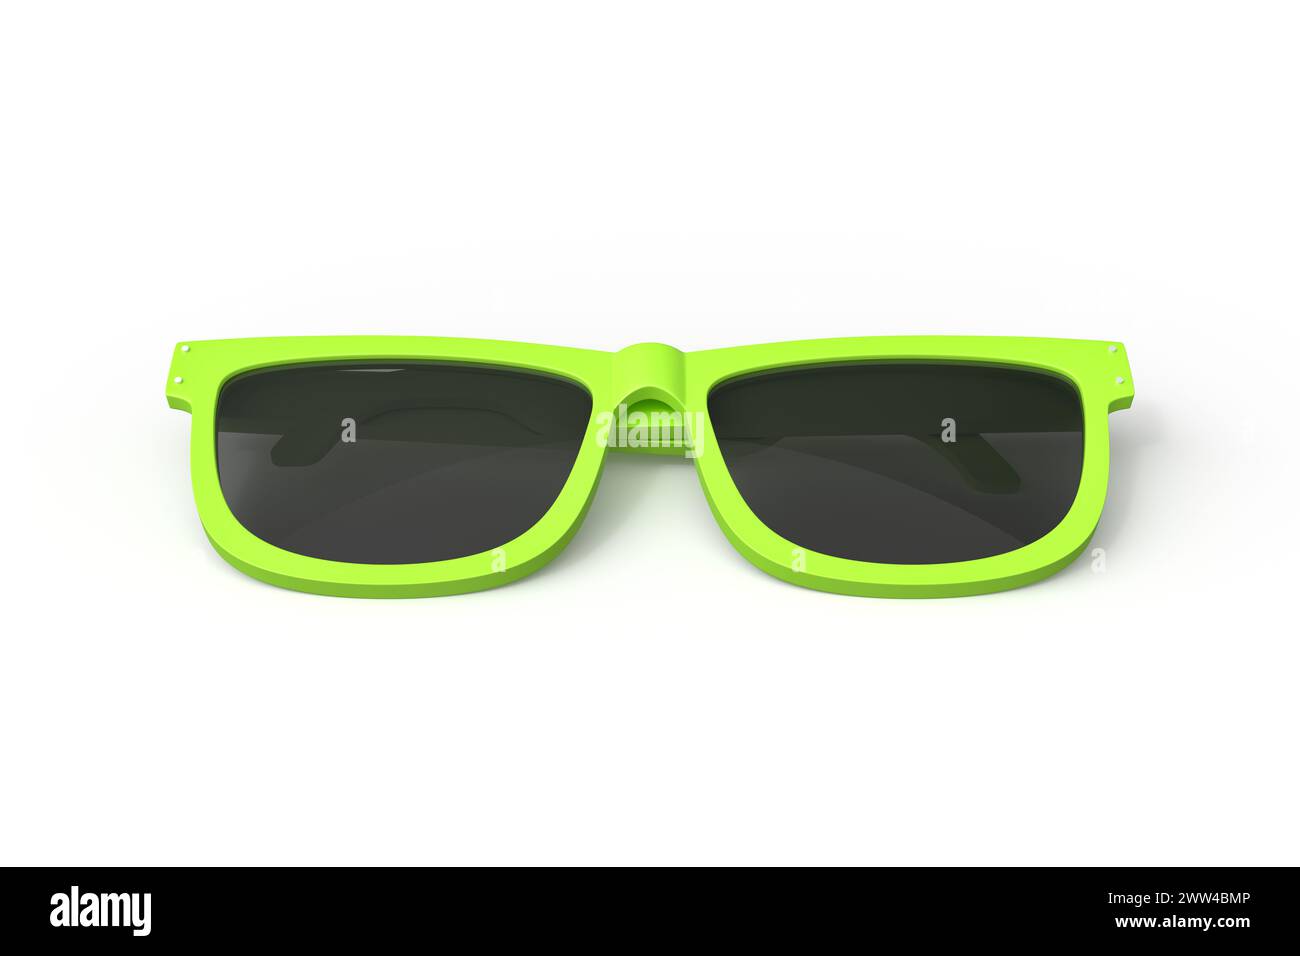 Open green sunglasses front view Stock Photo